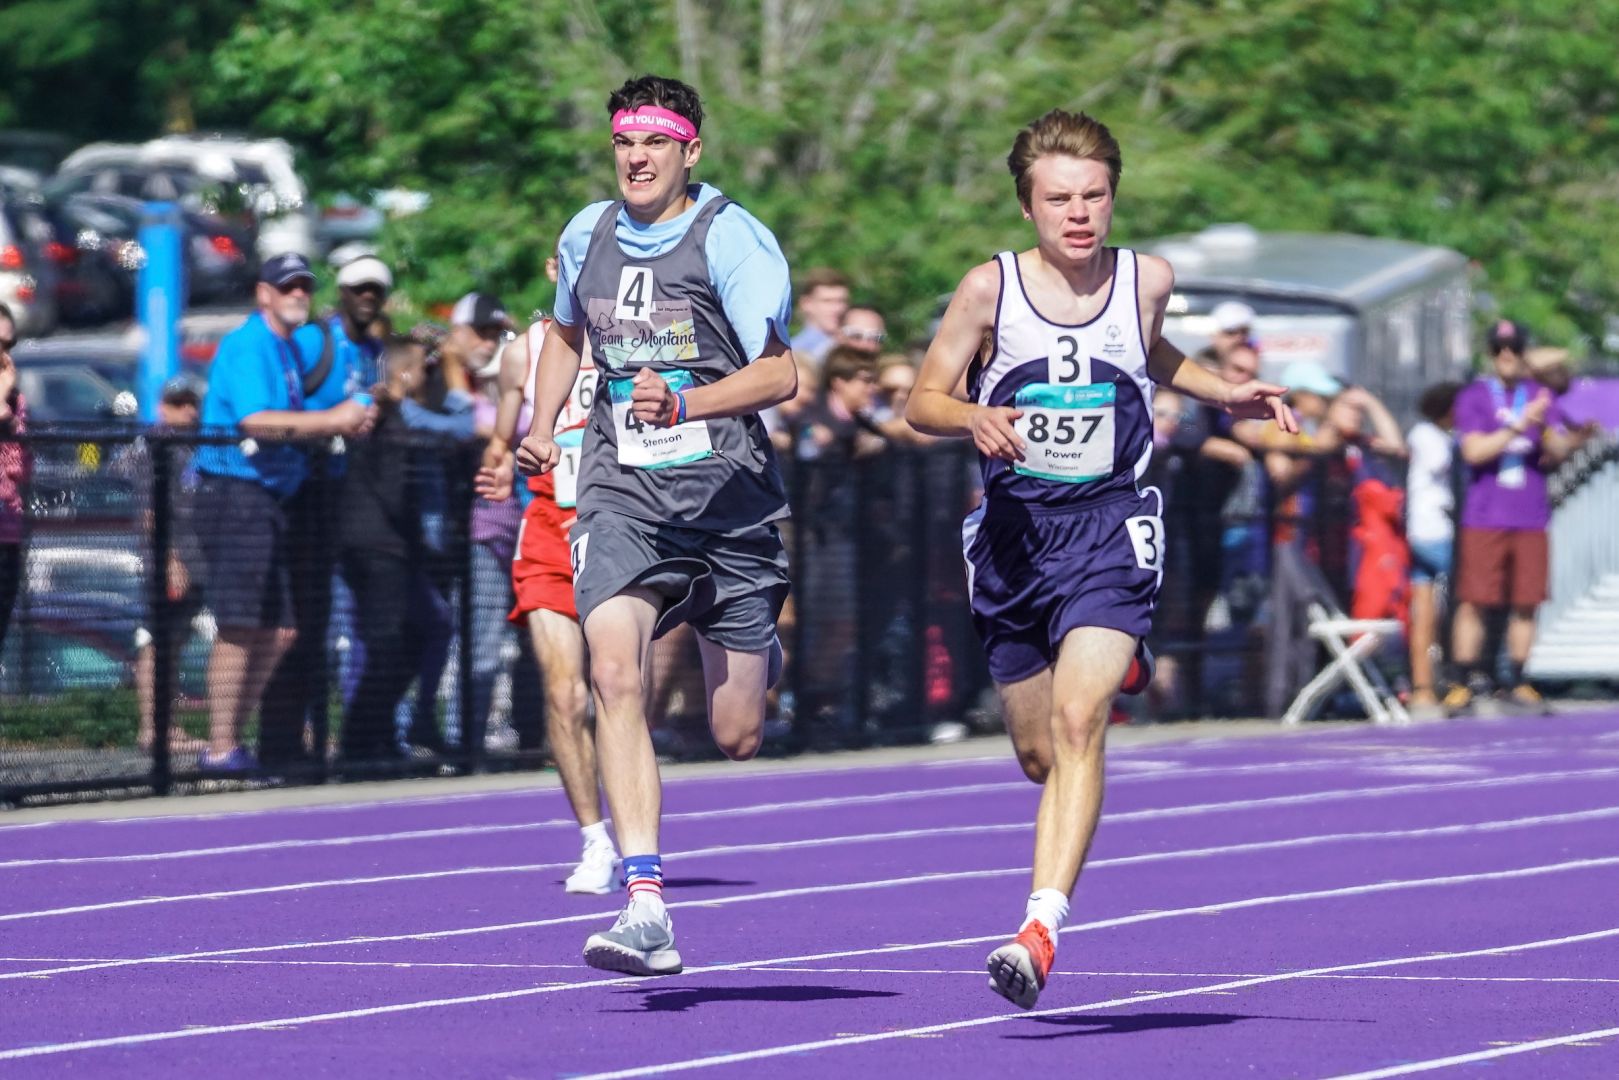 Stephen Power (R) pushes hard to hold off the competition in his silver-medal winning 200-meter dash